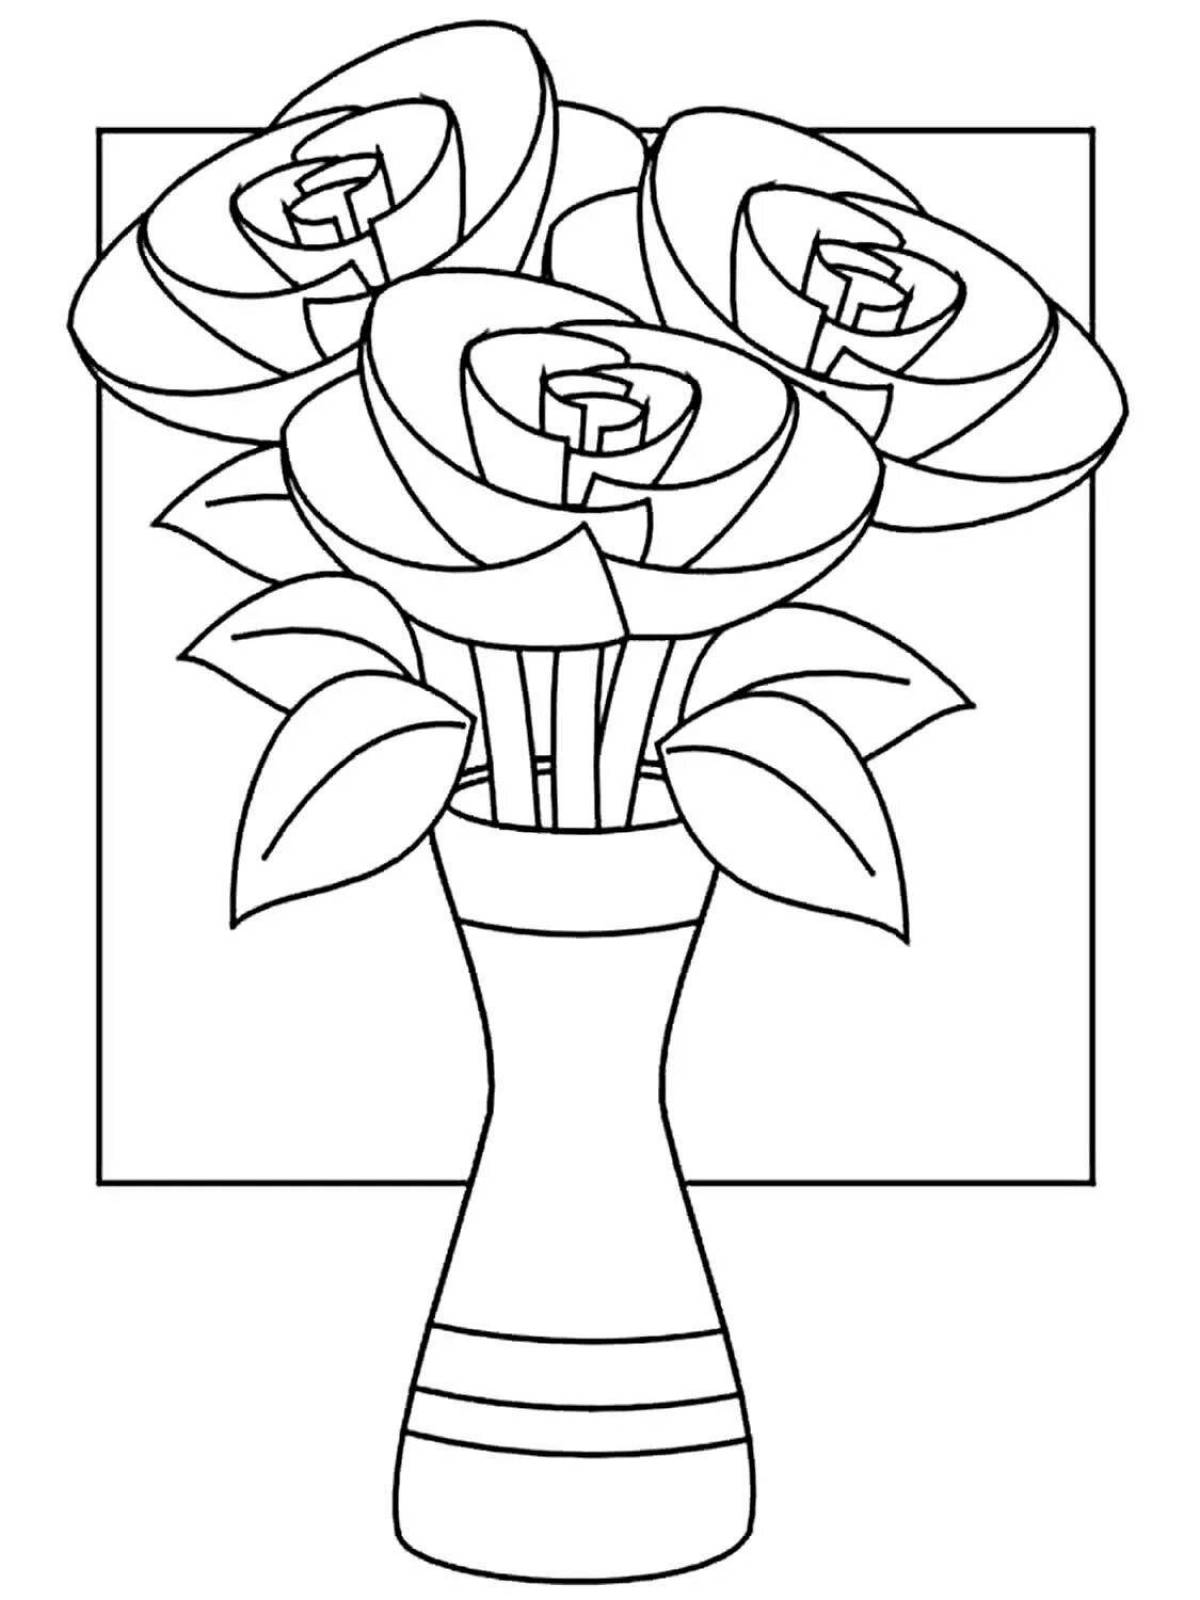 Playful vase of flowers coloring book for children 5-6 years old